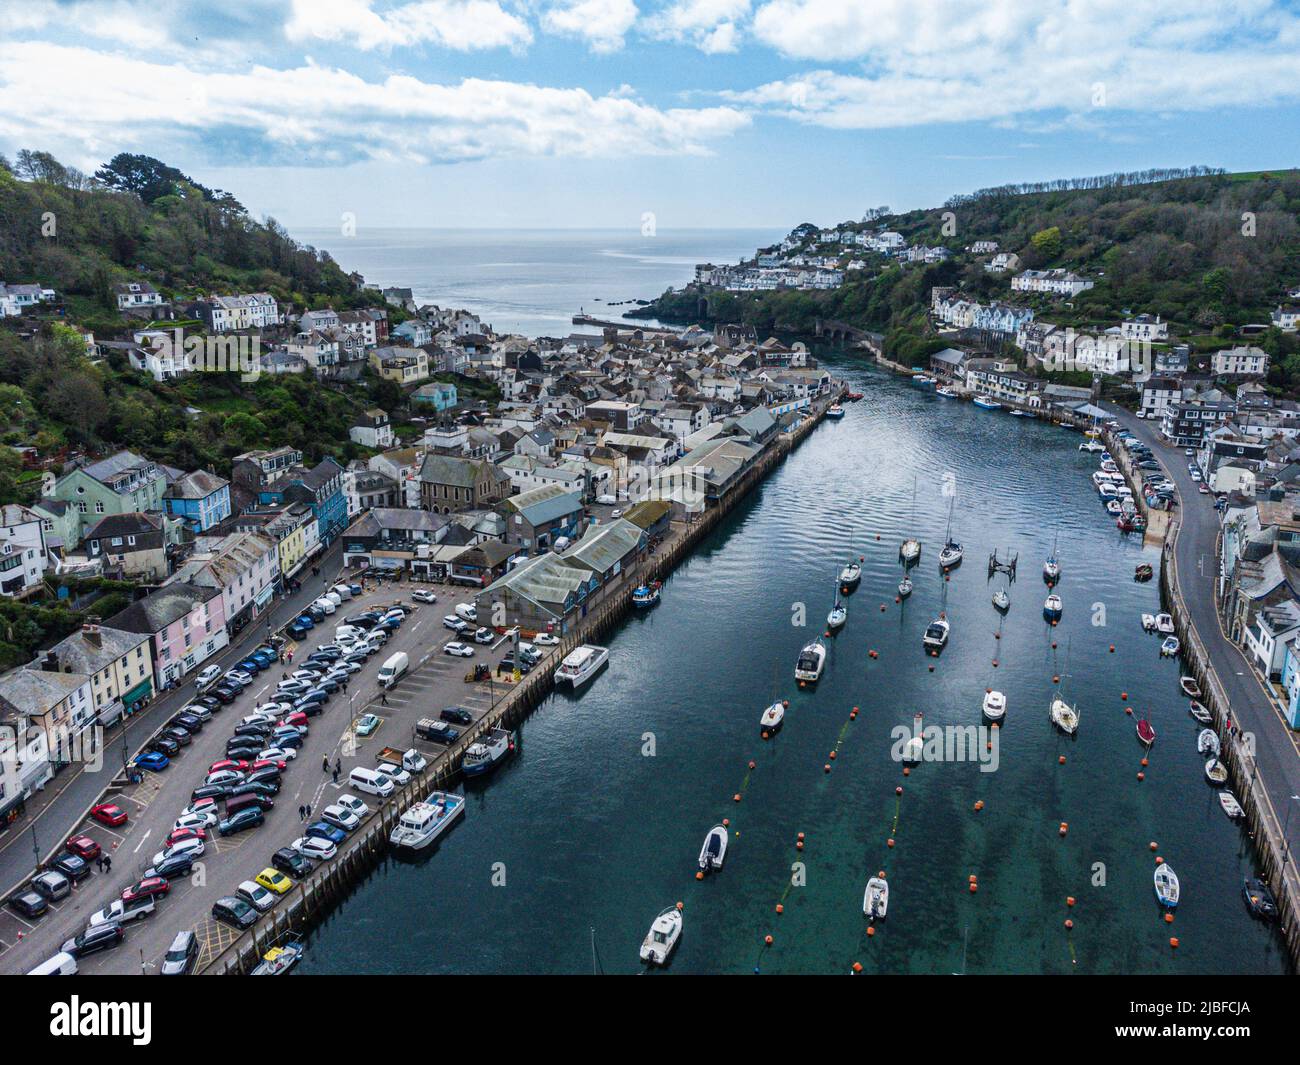 Aerial view over Looe, Cornish fishing town and popular Holiday destination, Cornwall, England, United Kingdom Stock Photo